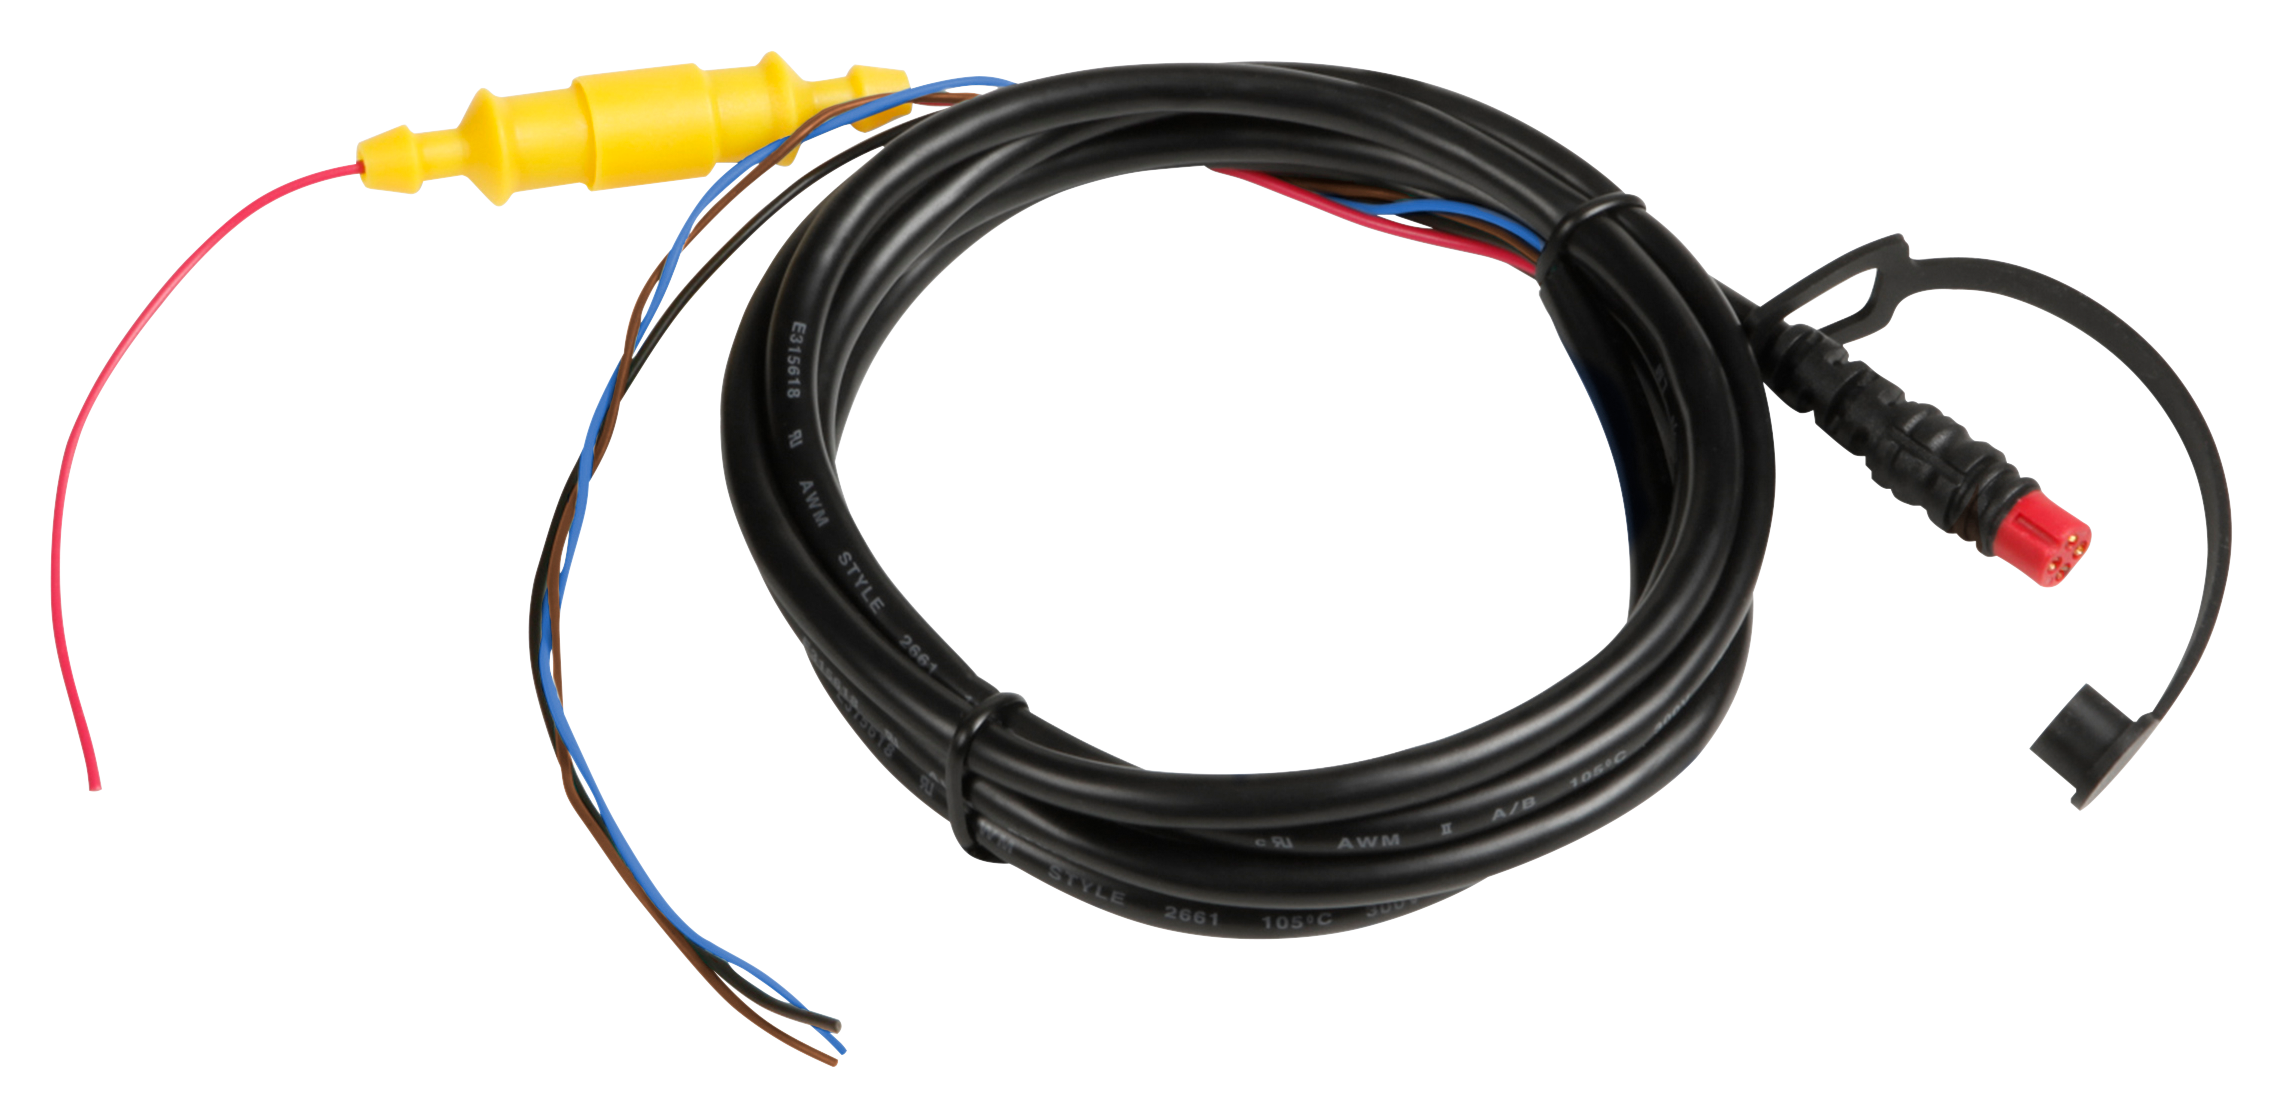 Garmin 4-Pin Power/Data Cable for echoMAP sv Fish Finders